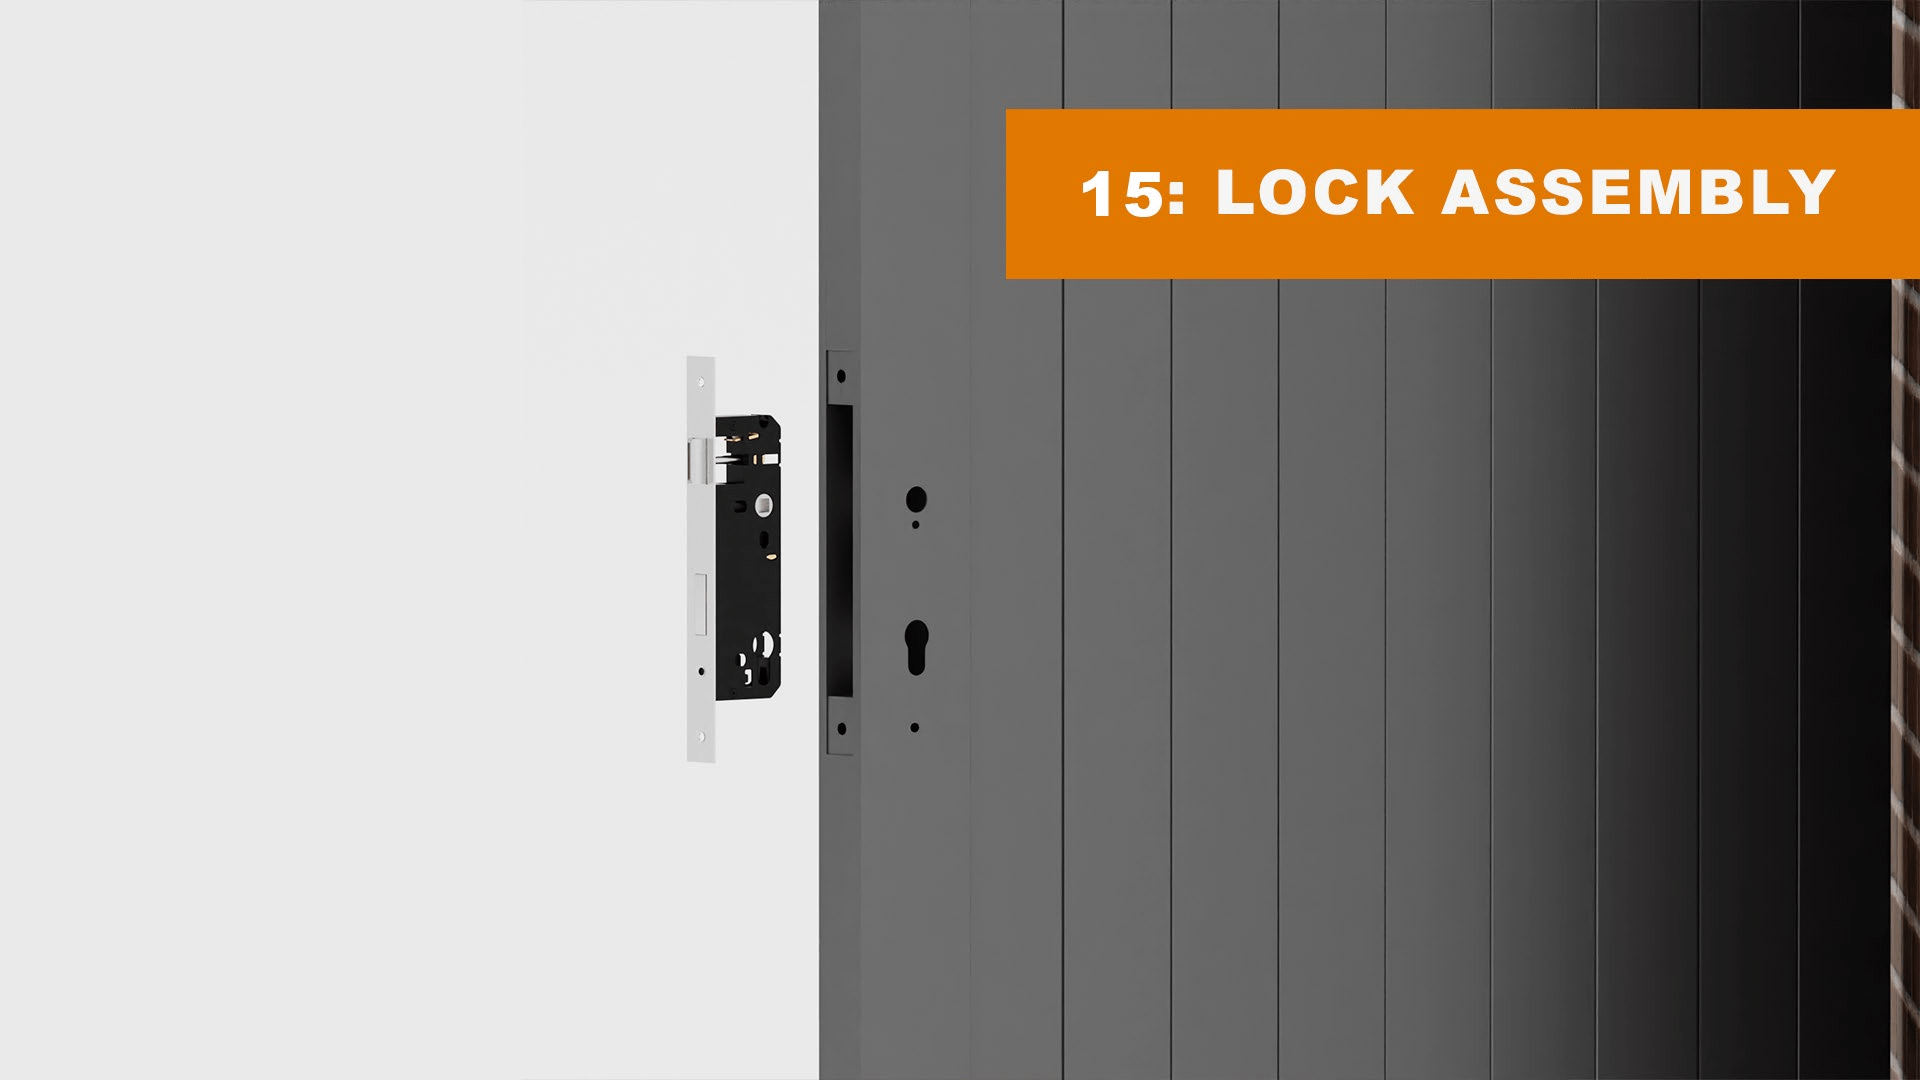 Install the lock assembly